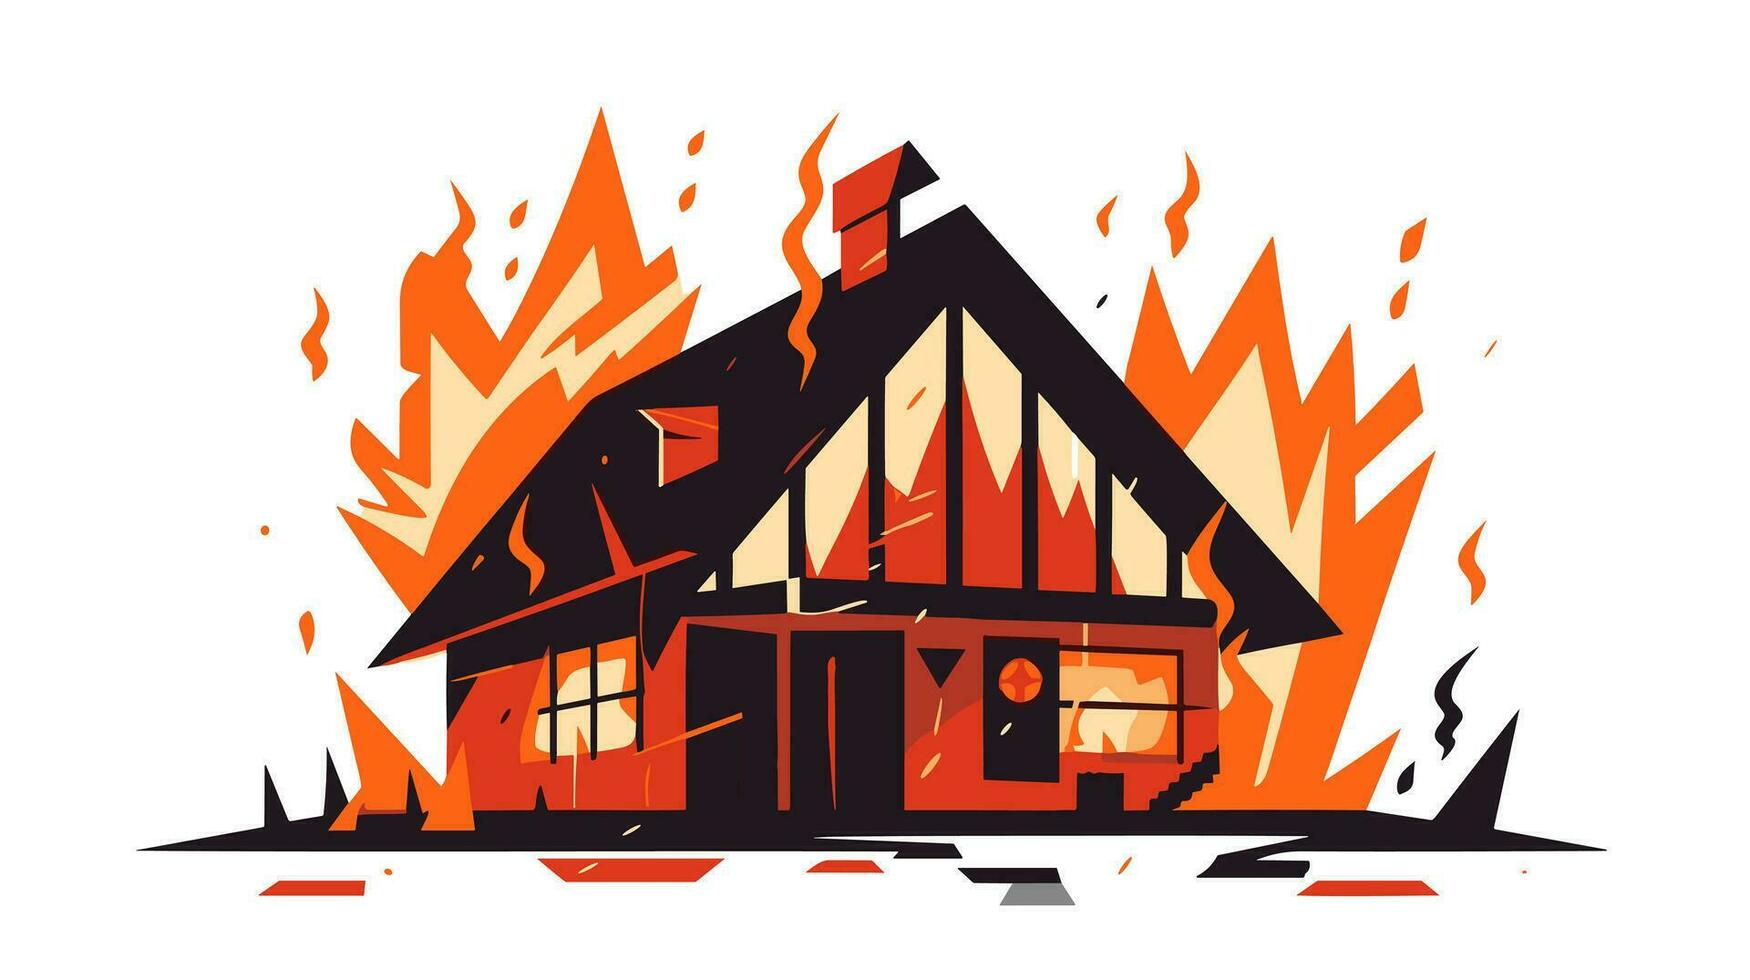 Dramatic Blaze Exploring the Intense Image of a House on Fire in the Banner vector